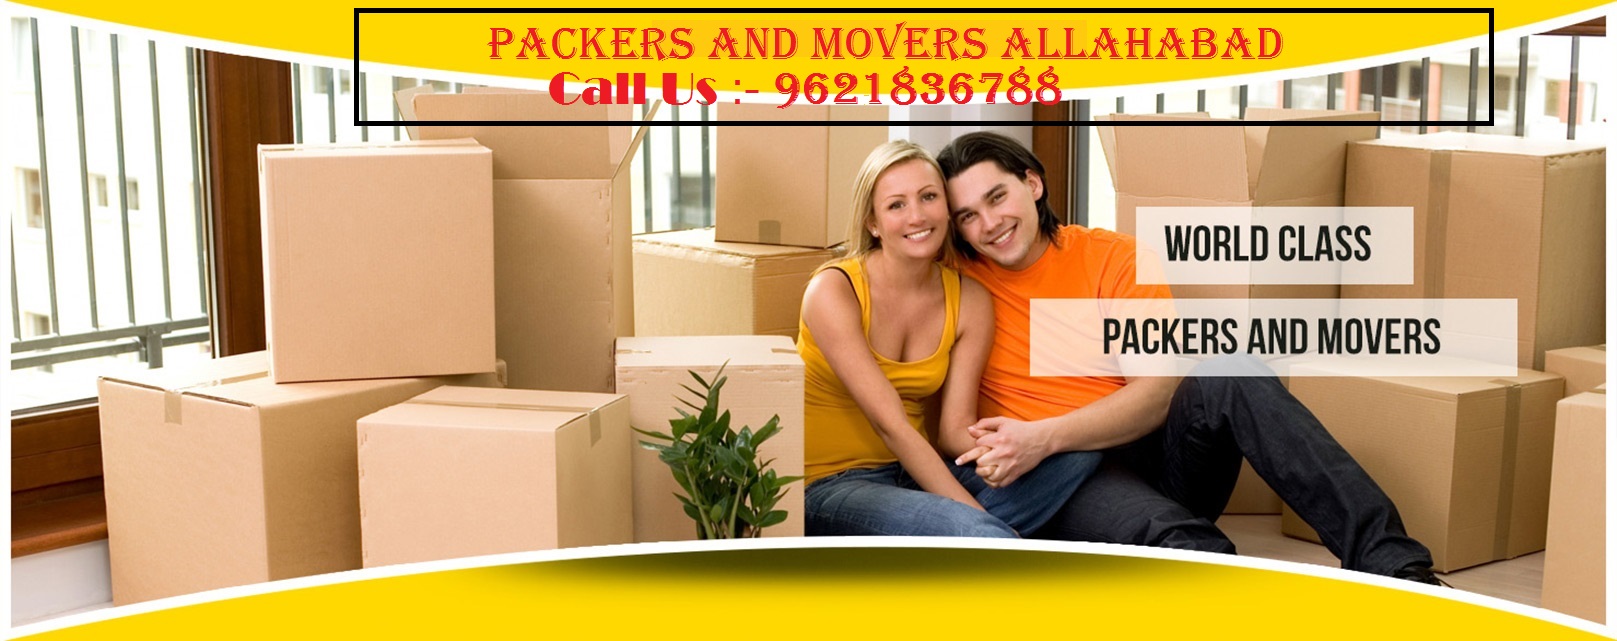 Top Packers and Movers in Allahabad